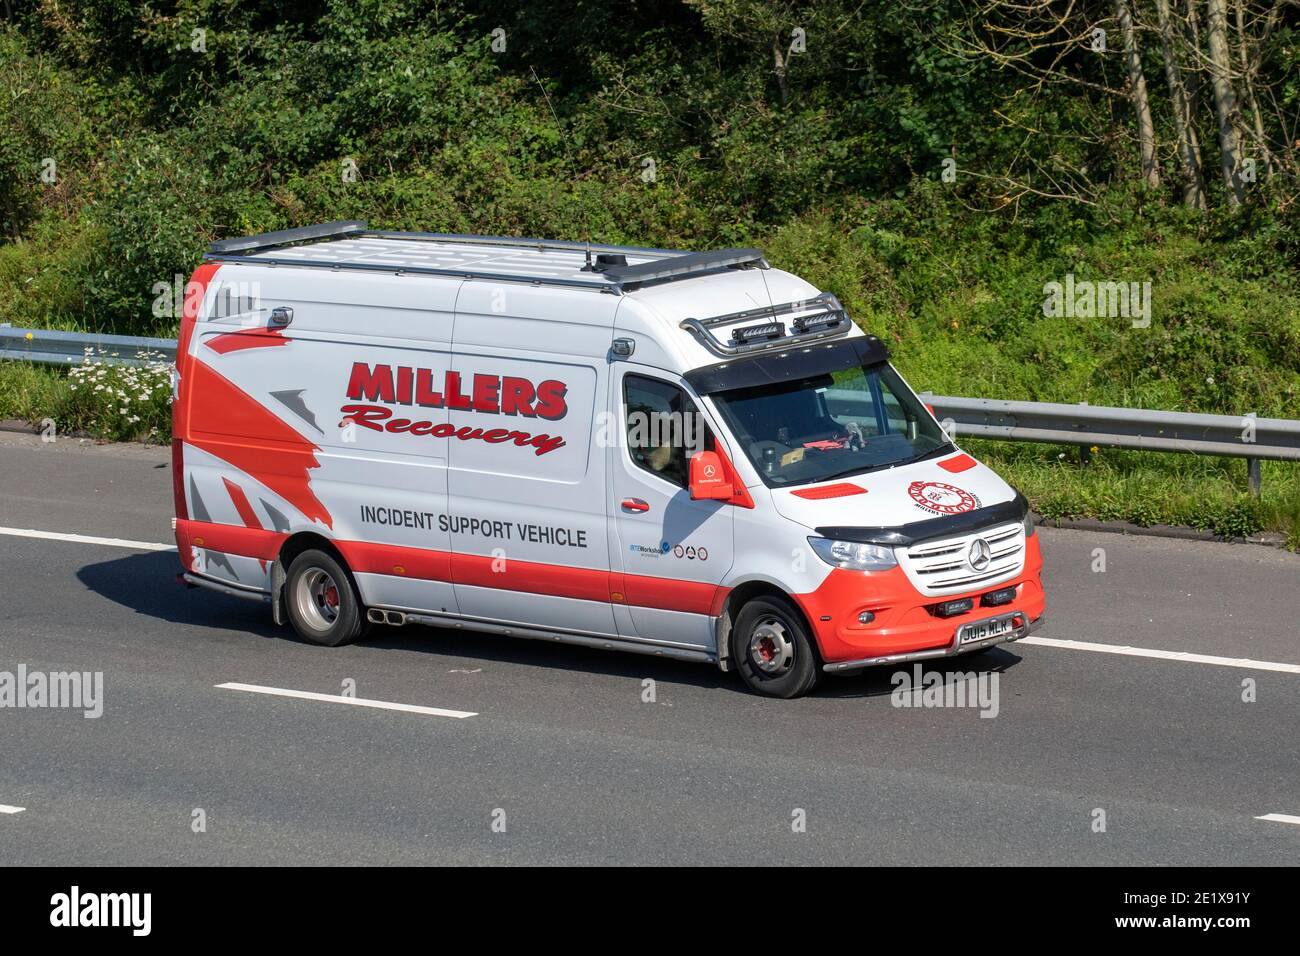 Millers of Longton Ltd local and nationwide 24hr breakdown and recovery service for commercial vehicles. 2019  LCV Mercedes Benz Sprinter 519 Cdi Auto 2987cc diesel panel van Stock Photo